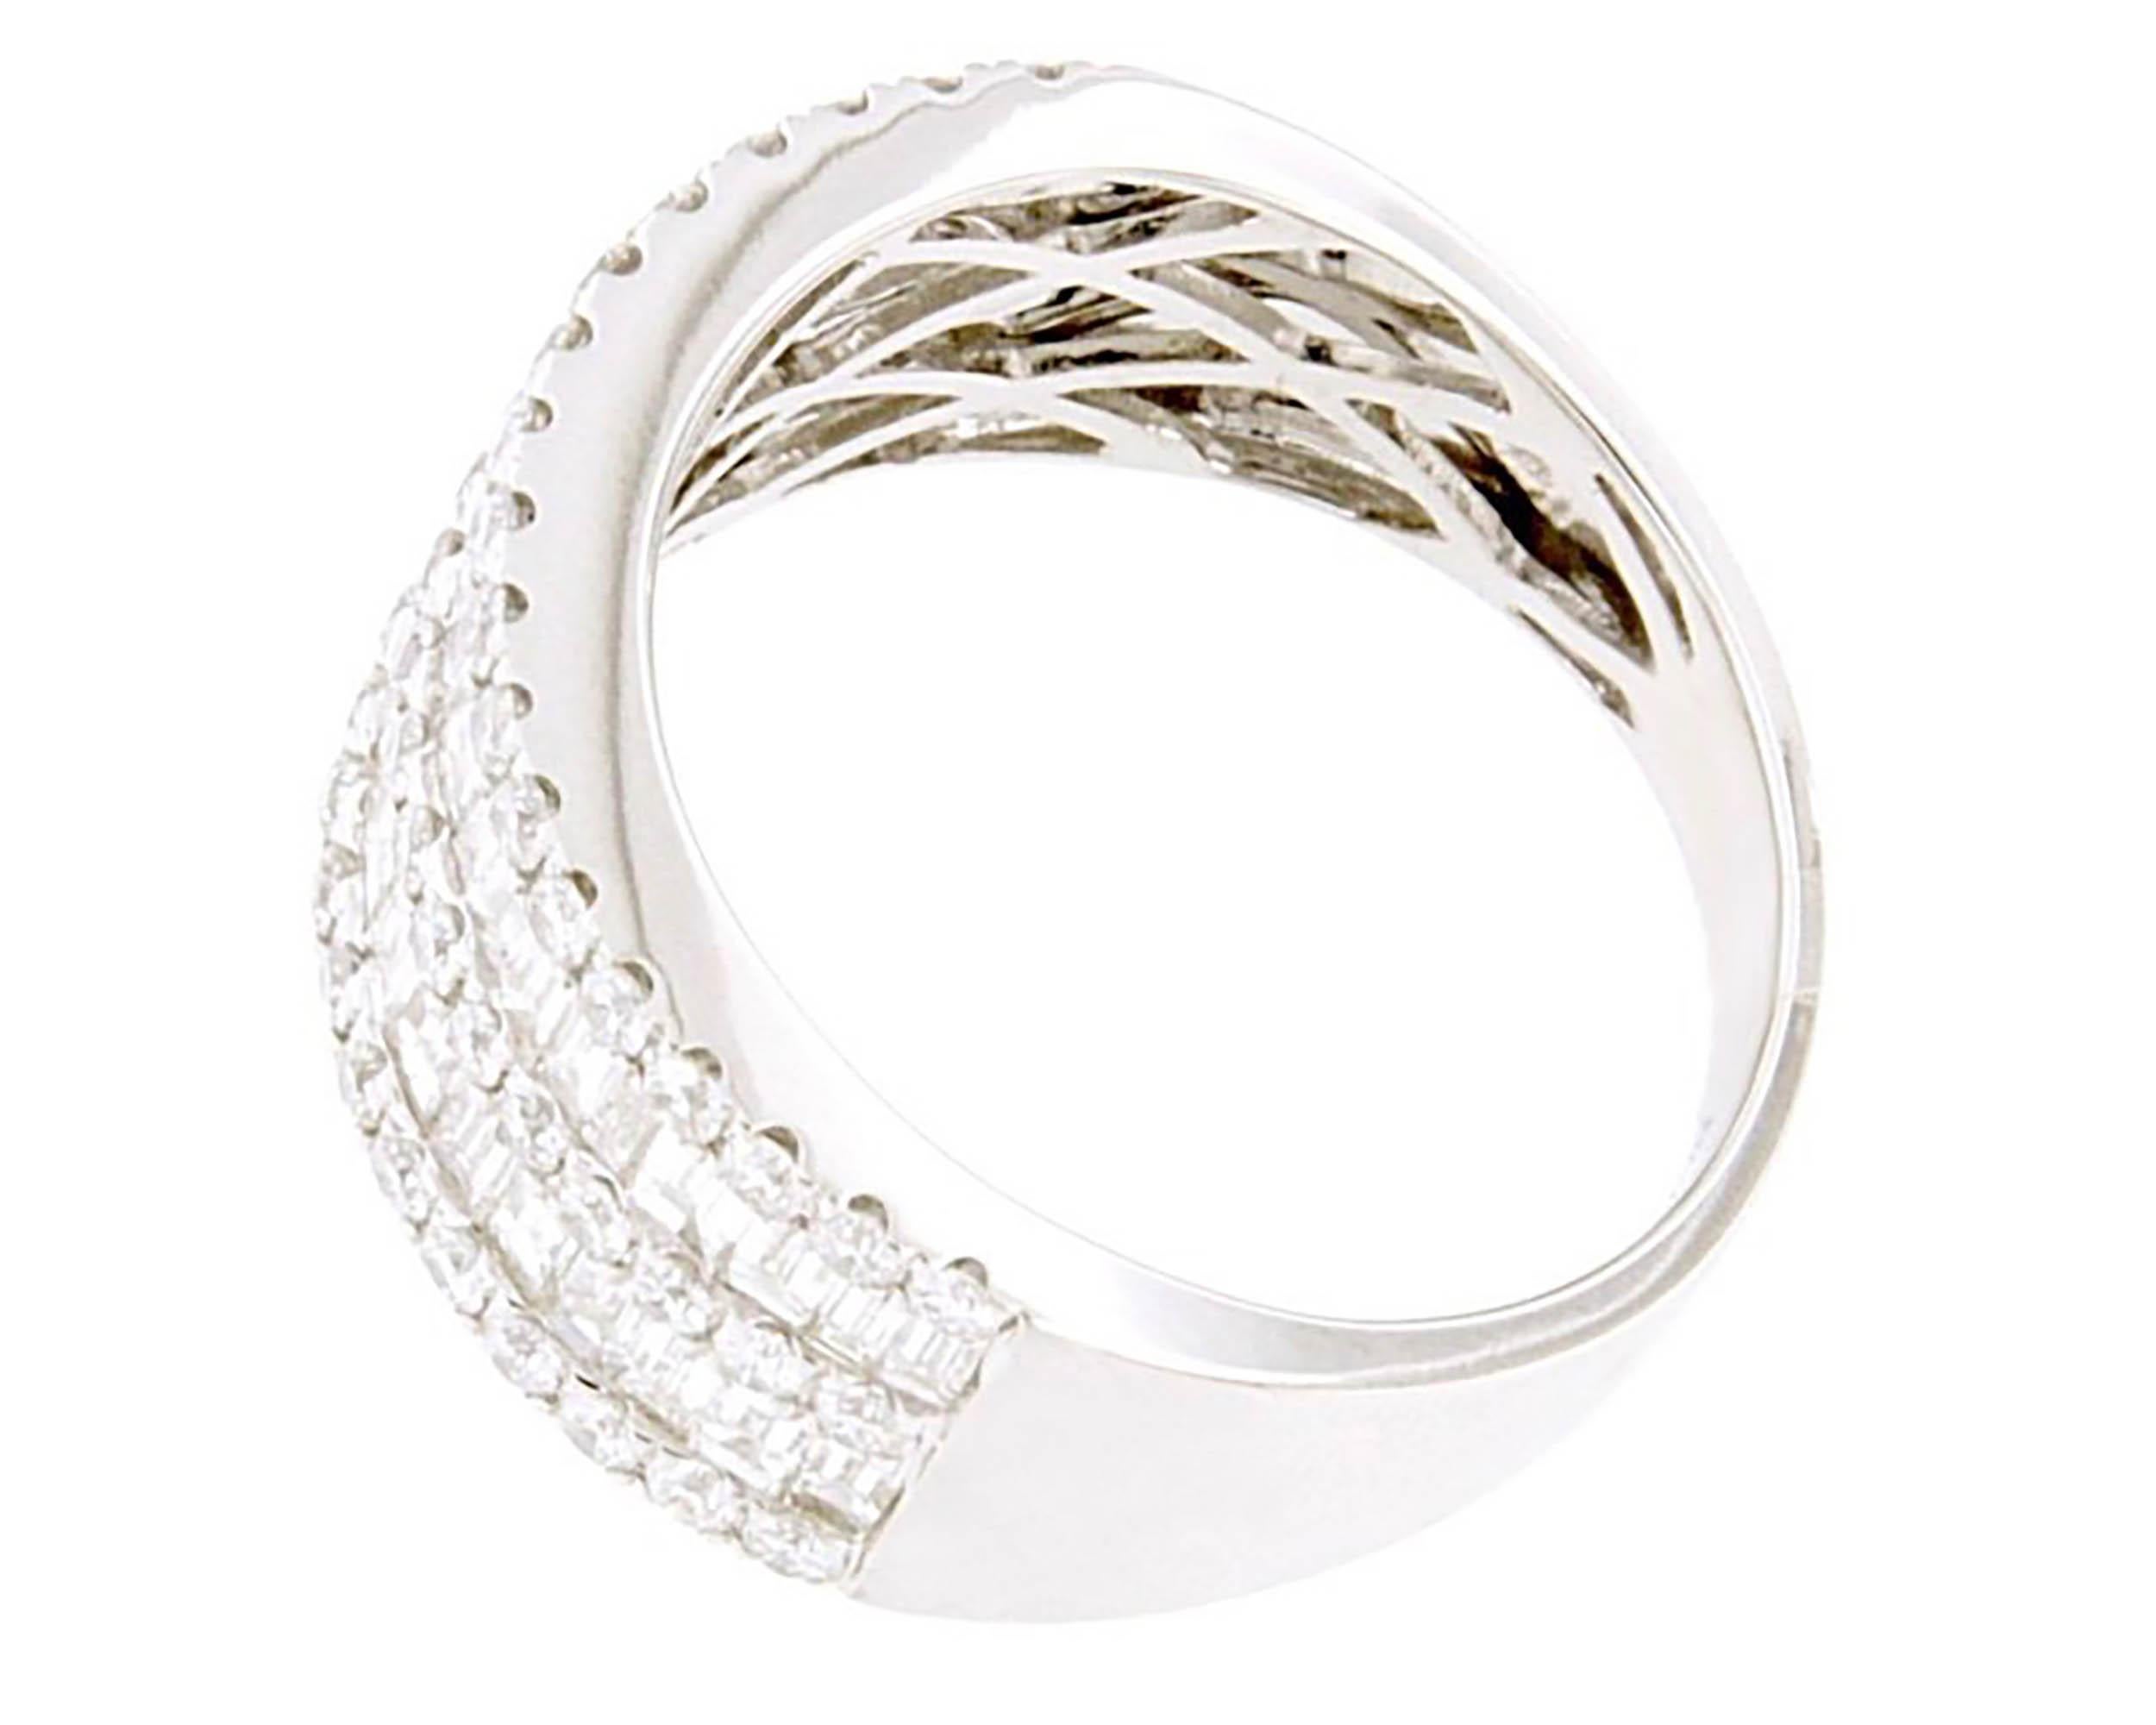 Diamond Cocktail Ring full white
Carat Diamond:  2.03
Cut Diamonds: Baguette and Round
Weight Ring: gr 8.1 
Resizable If needed this would come complimentary with your purchase
